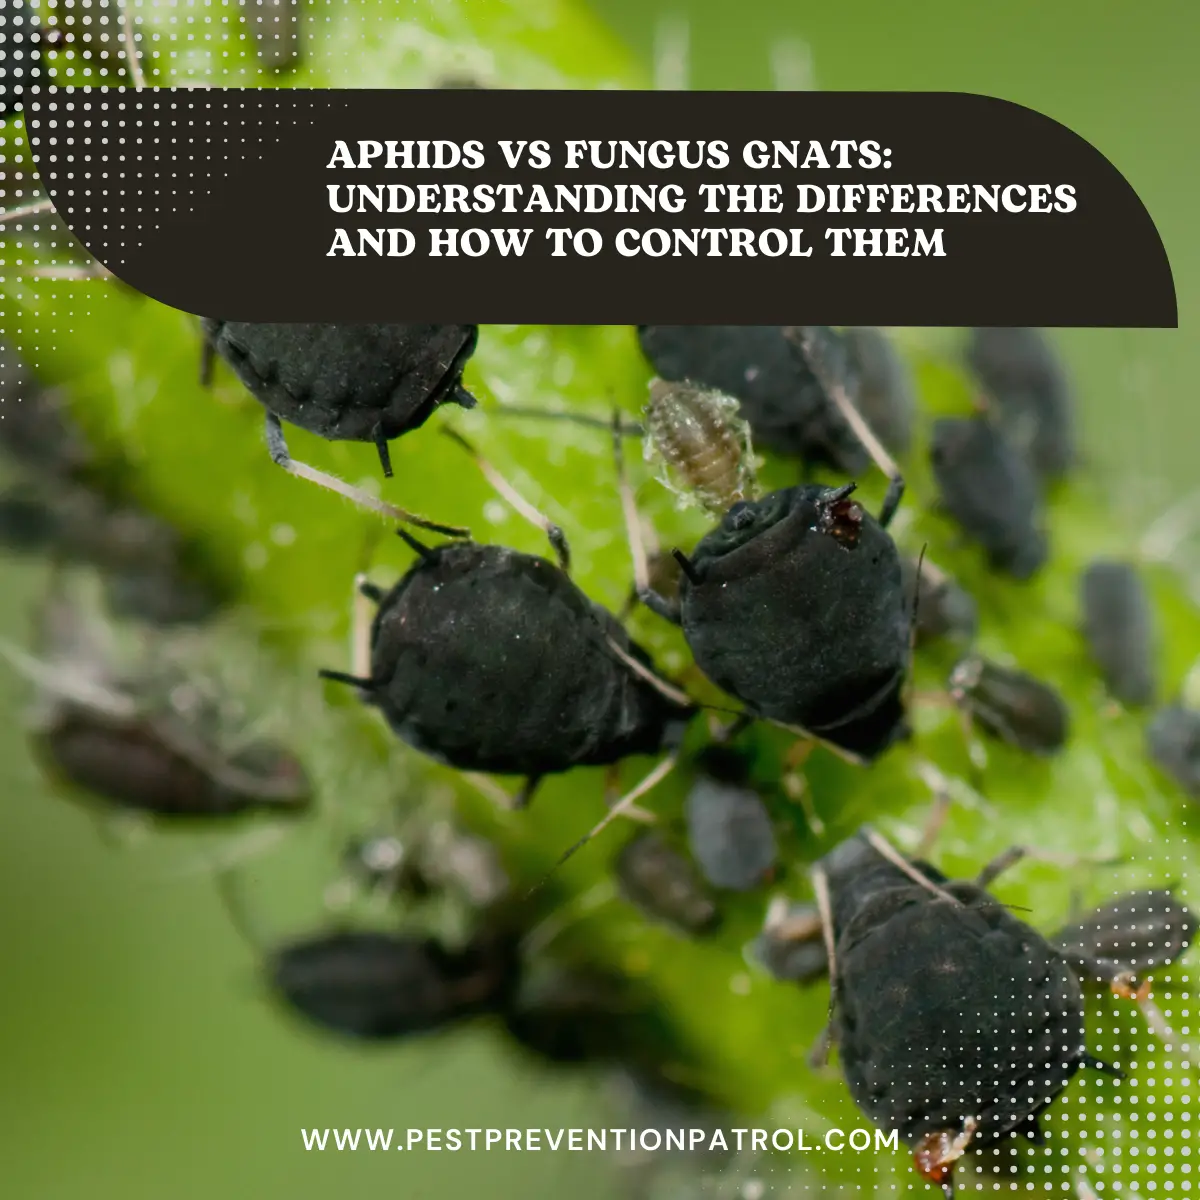 Aphids vs Fungus Gnats_ Understanding the Differences and How to Control Them